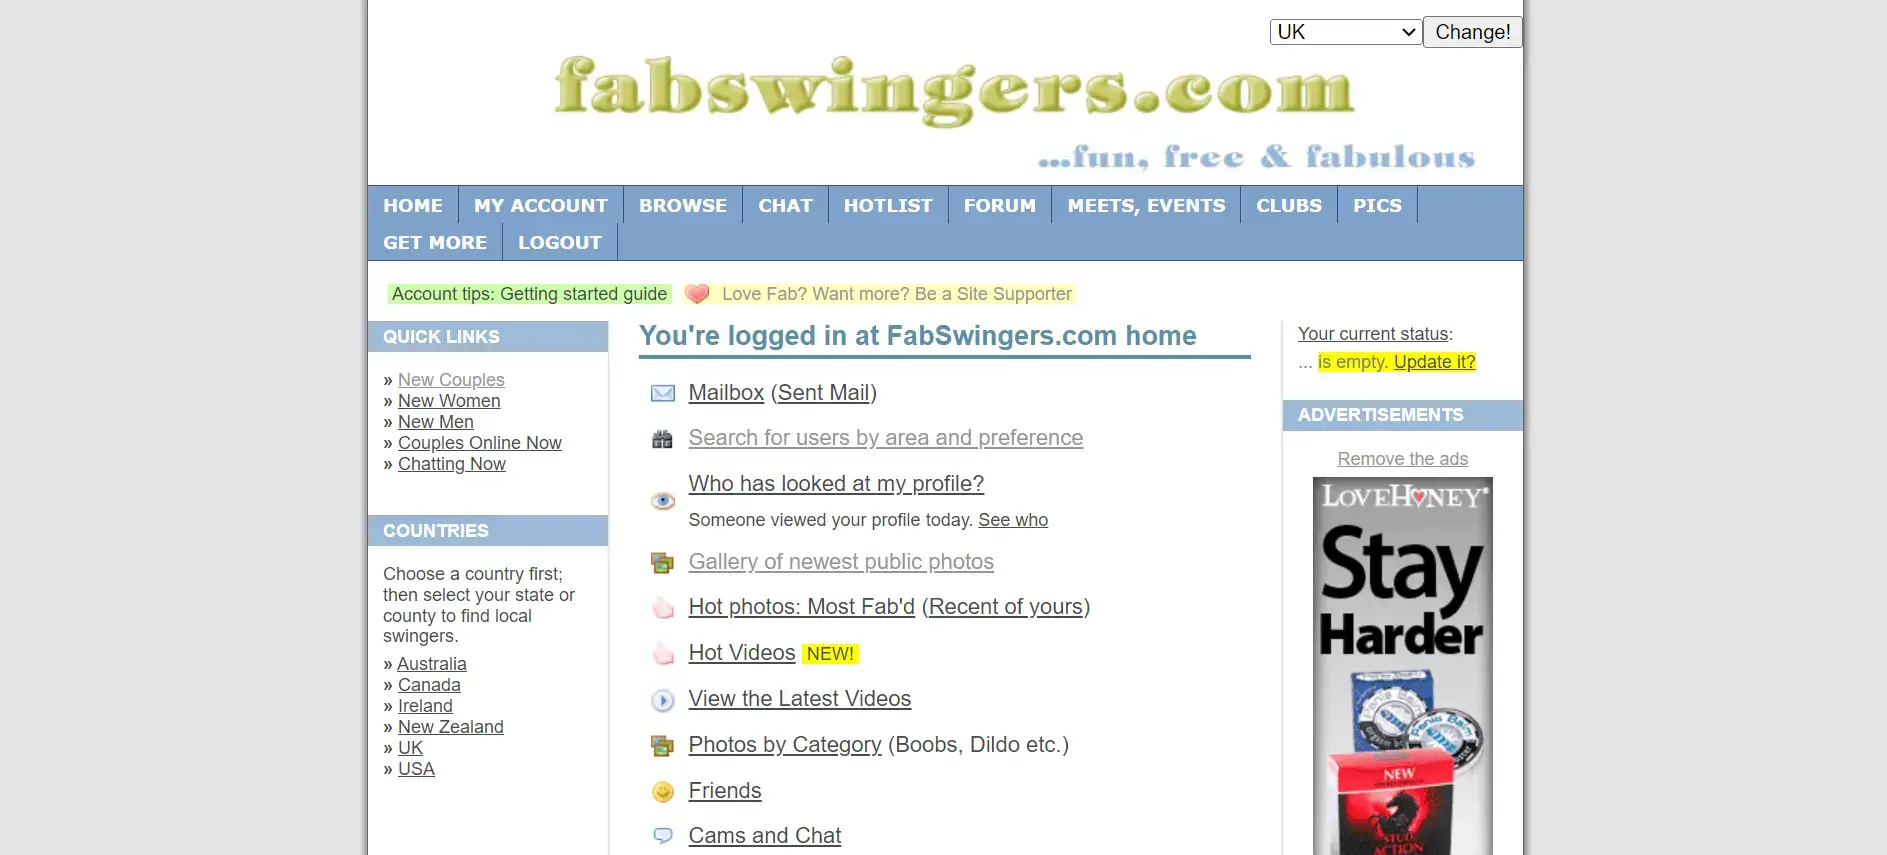 FabSwingers UK Review